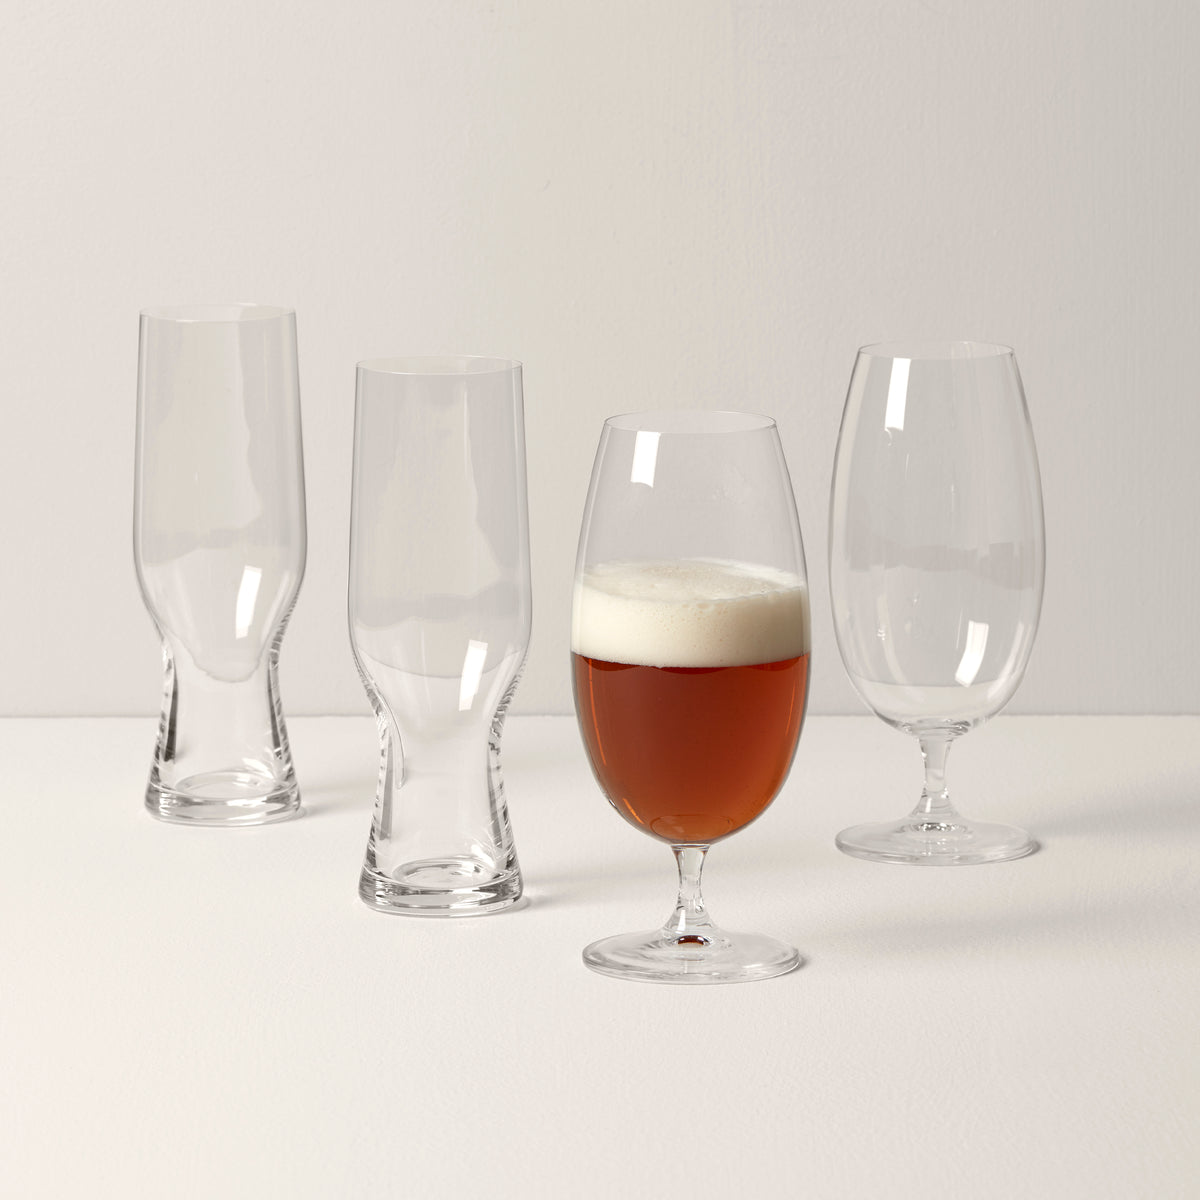 New! Spiegelau Craft Beer Glasses From Tasting Kit/ Lot of 2